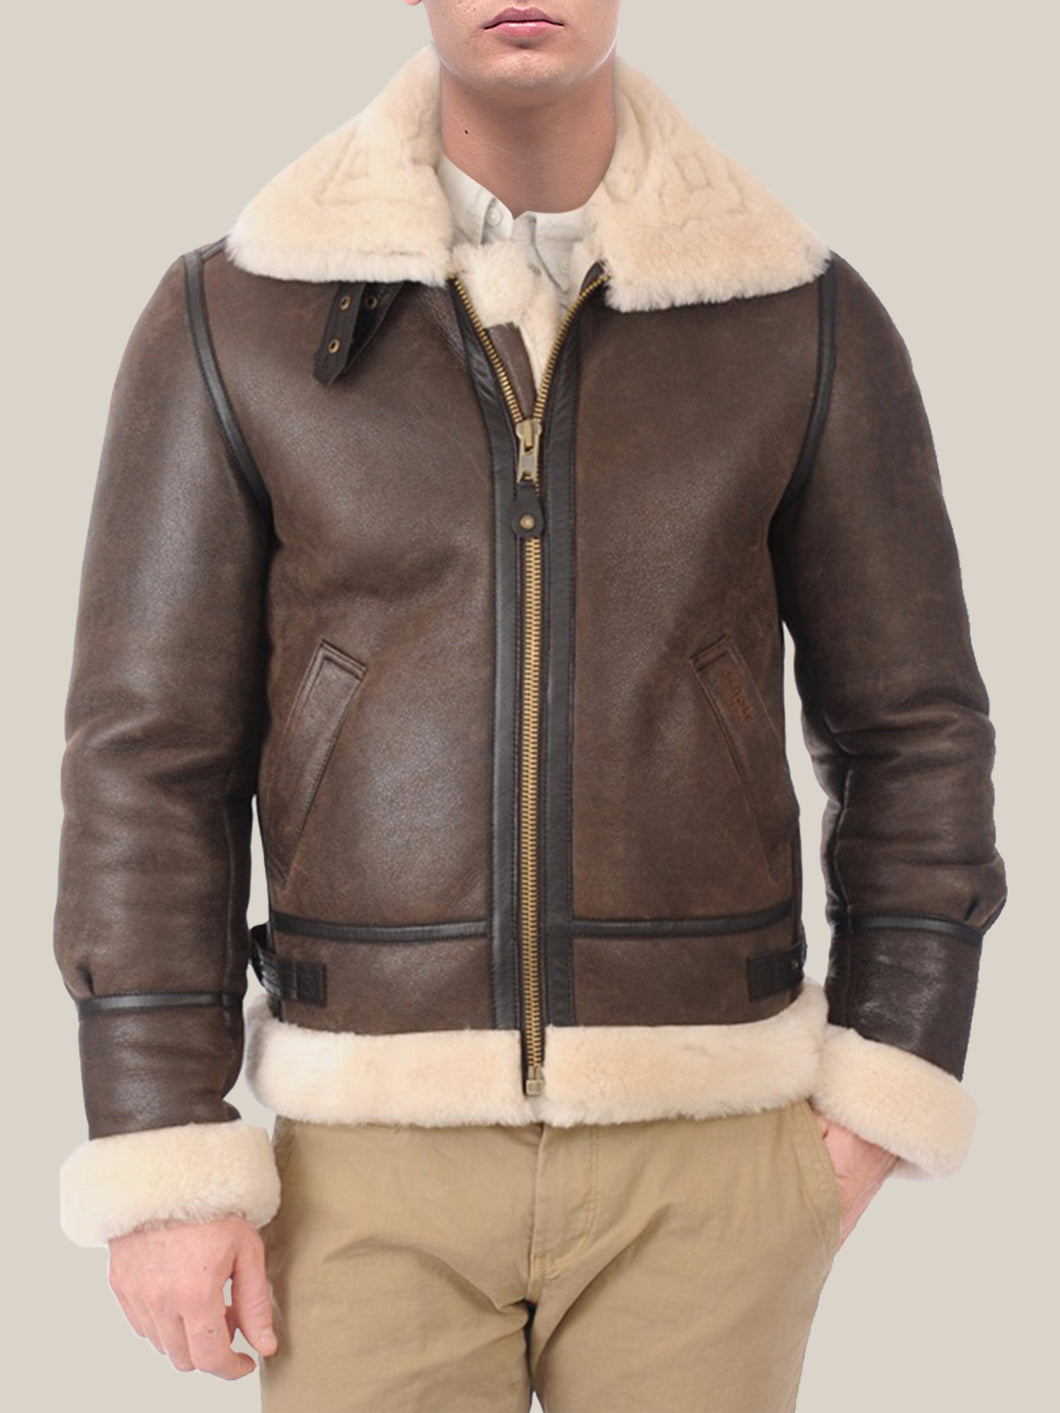 Men's Foxy Brown Shearling Leather Jacket